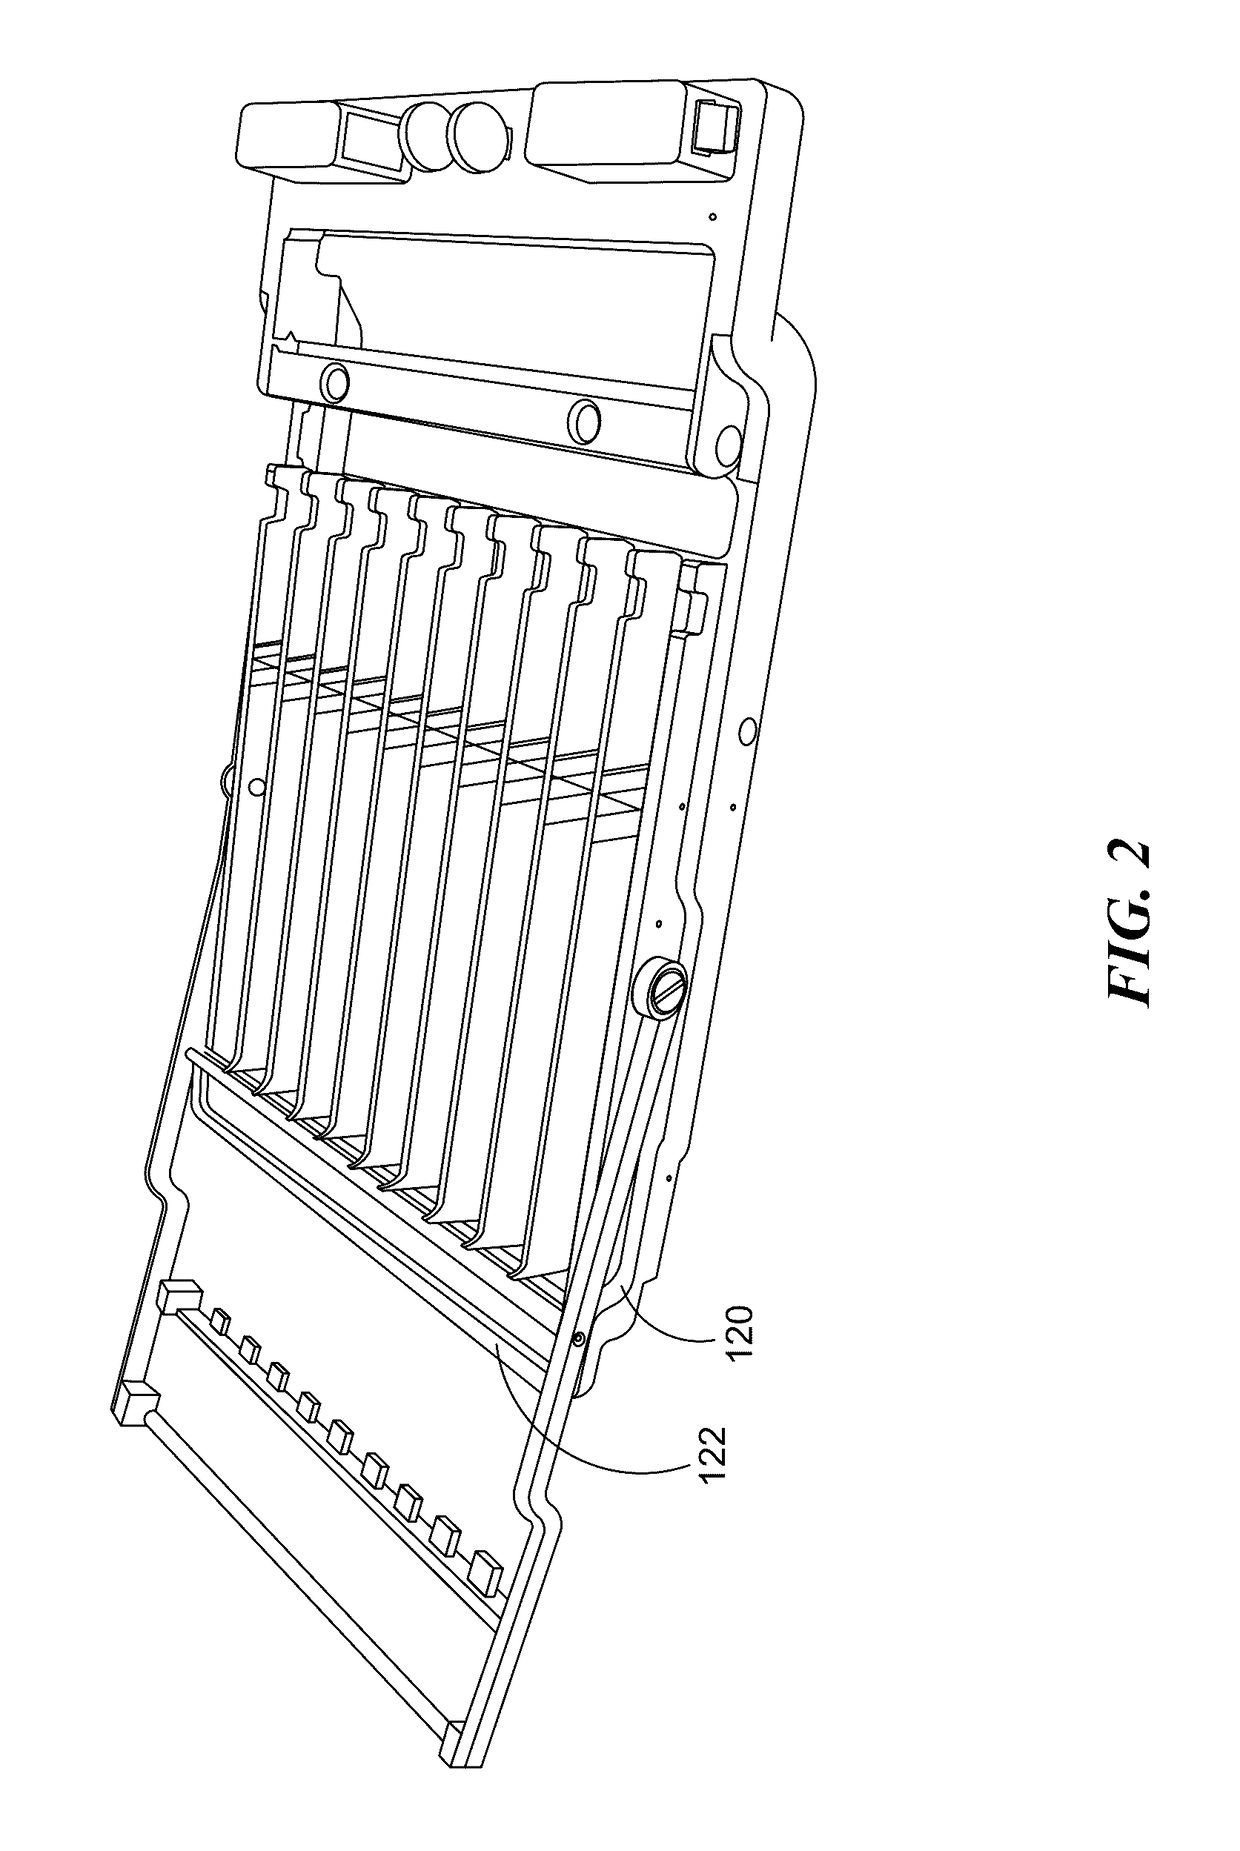 Cartridge assembly tray for immunoassay tests